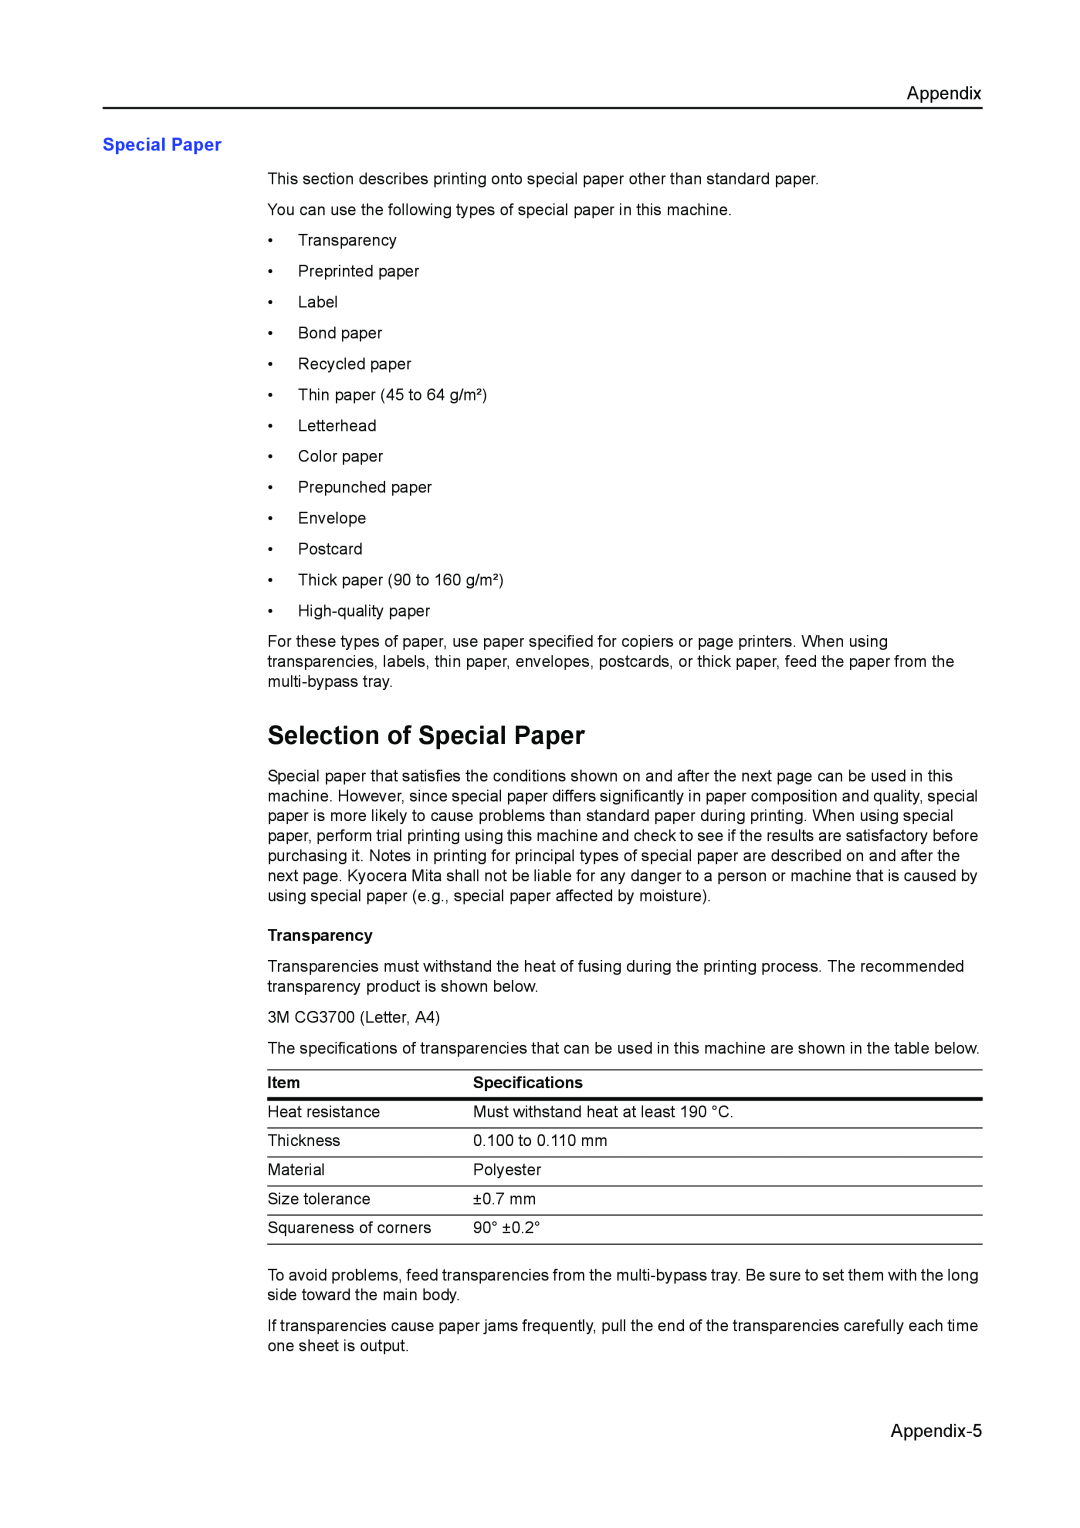 Kyocera 2050, 1650, 2550 manual Selection of Special Paper, Appendix-5 